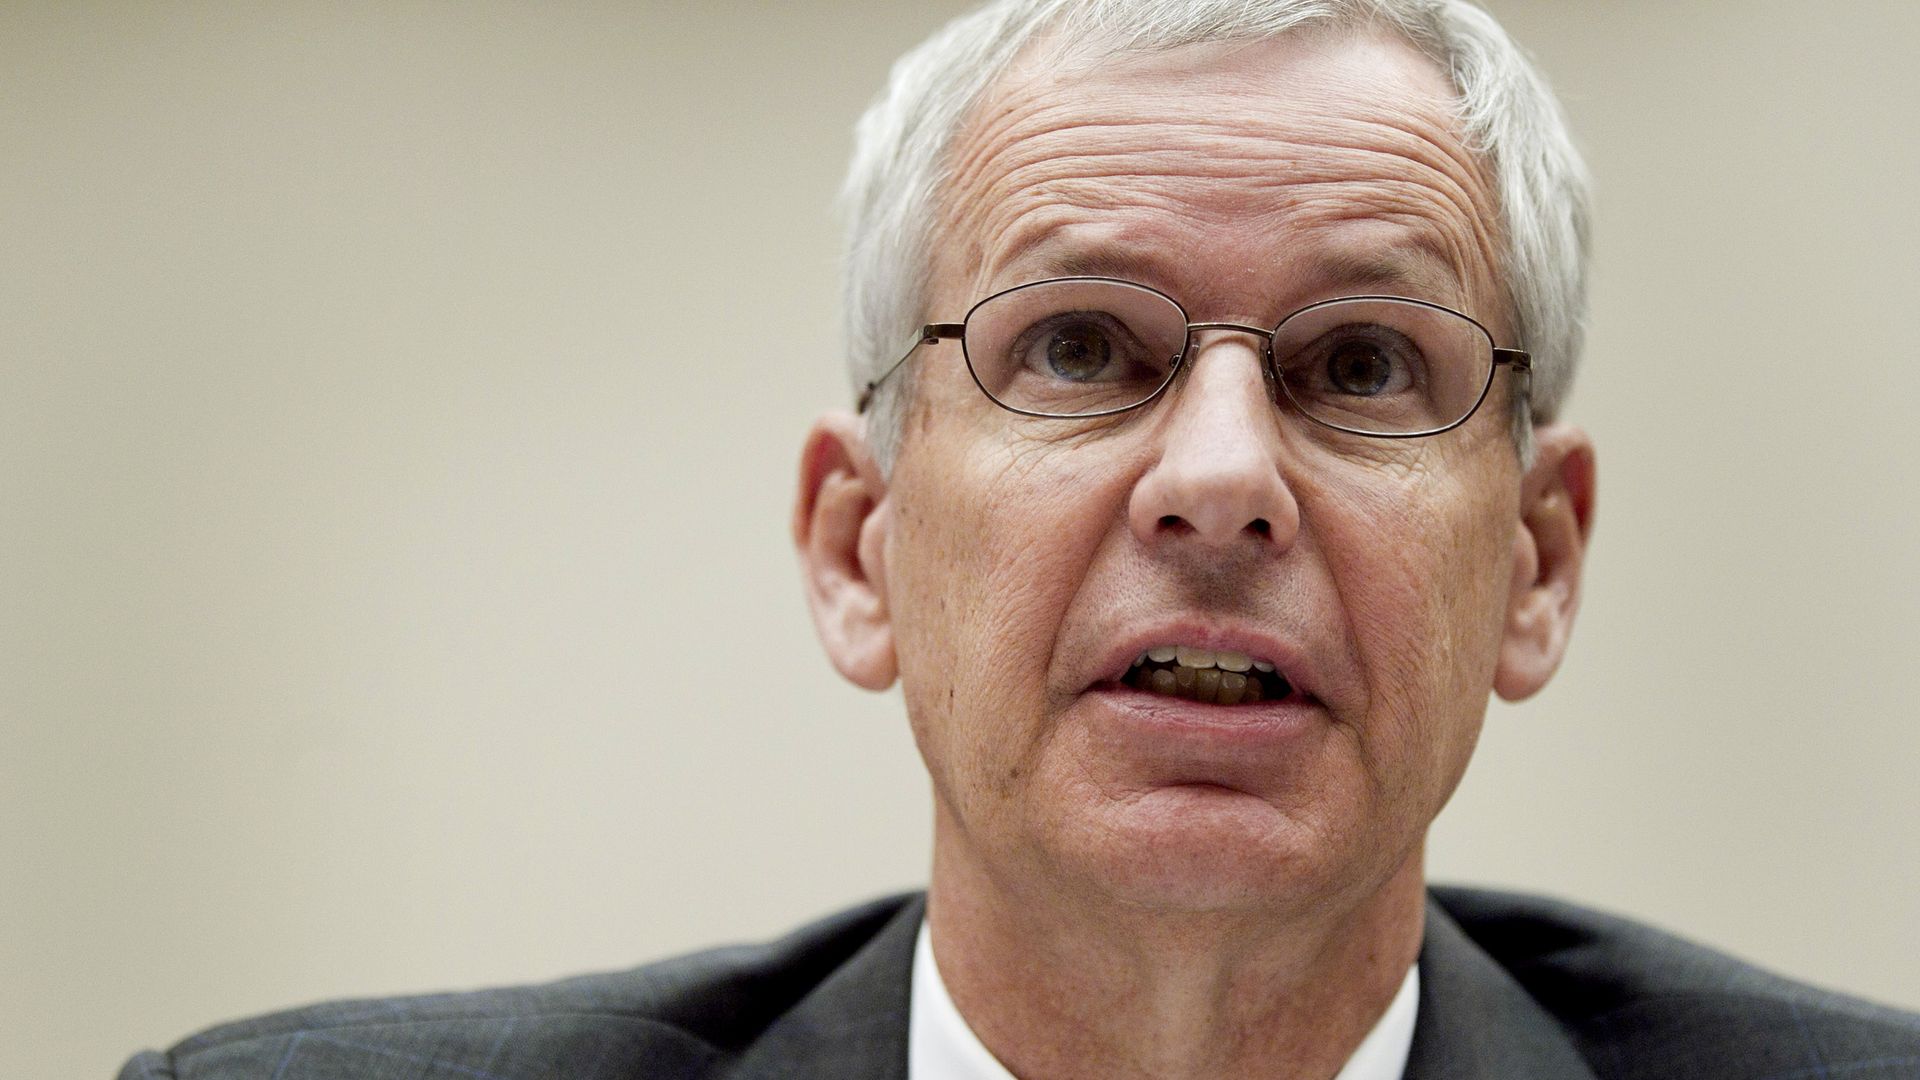 Dish Network chairman Charlie Ergen speaking during a congressional hearing in June 2012.